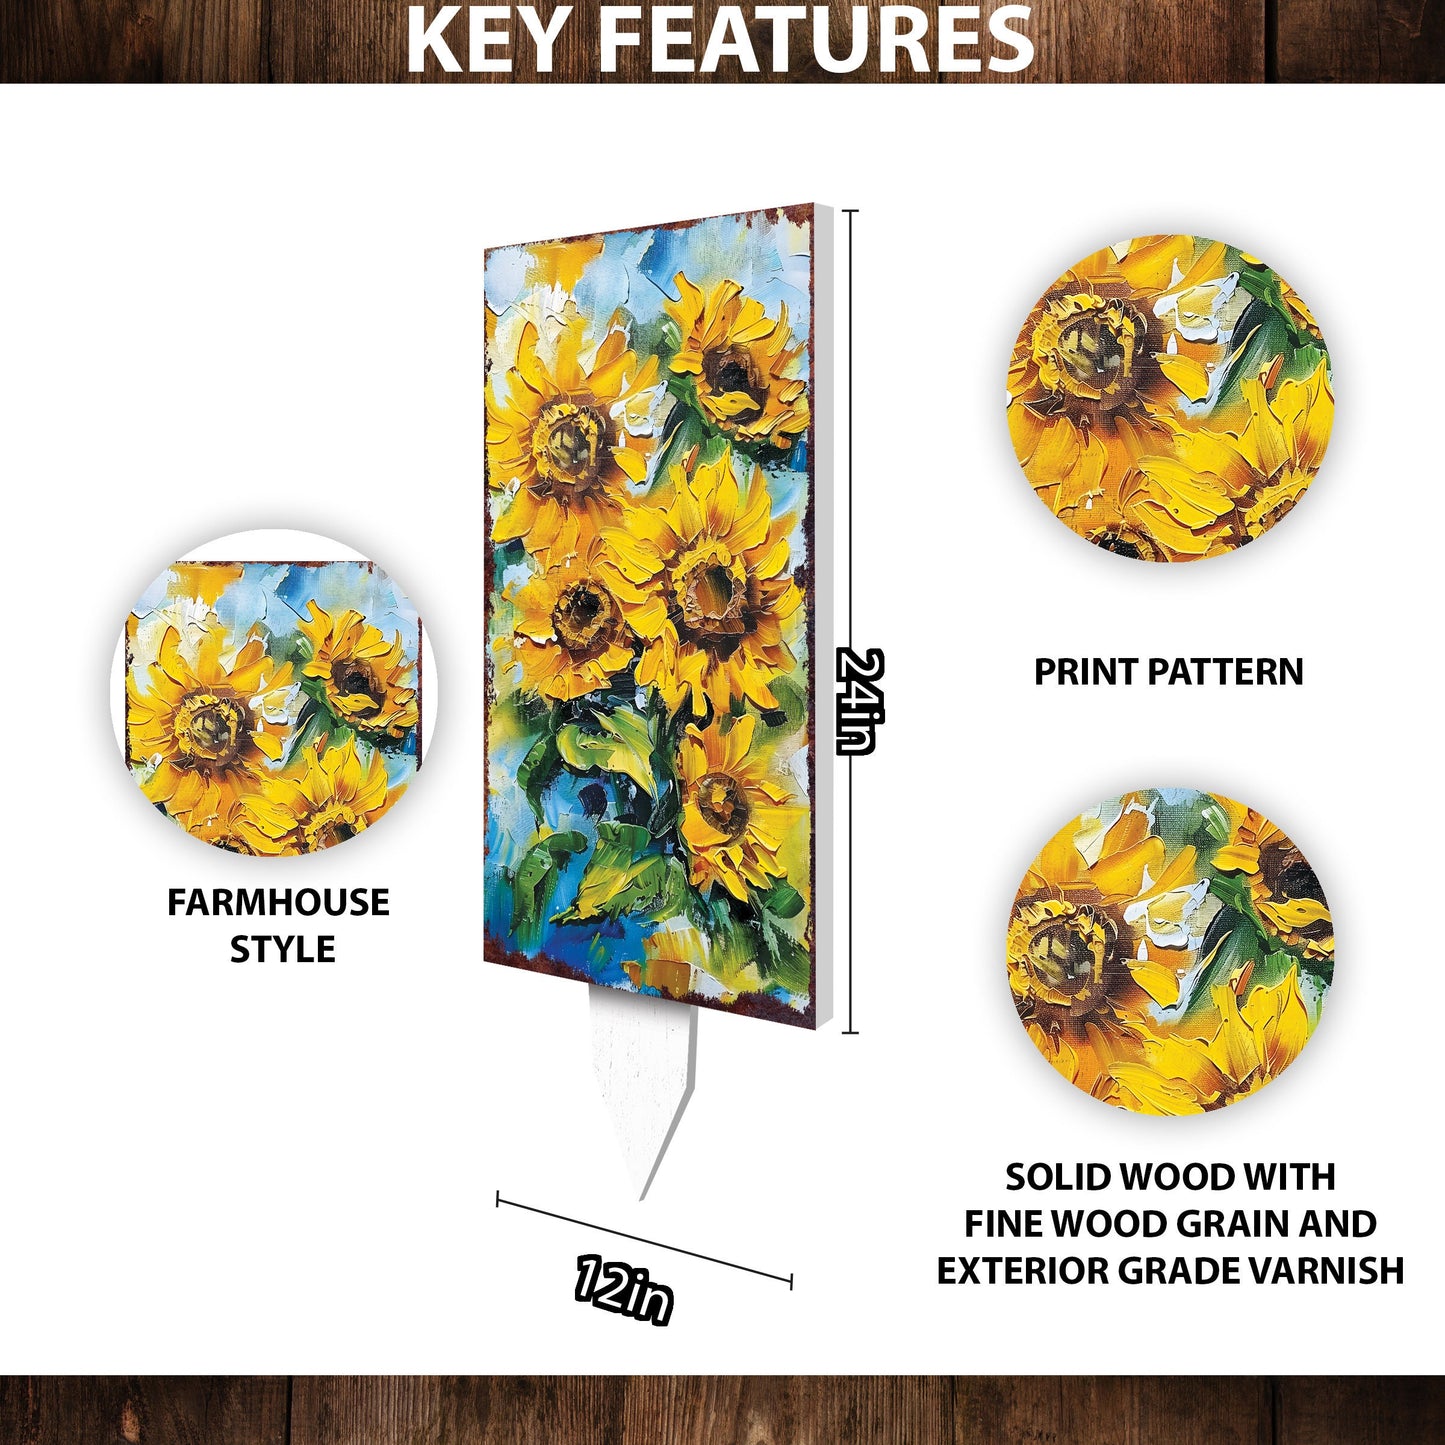 30in Summer Garden Stake - Oil Paint Style Sunflower Decor - Made in USA - Ideal for Outdoor, Yard, and Garden Decorations